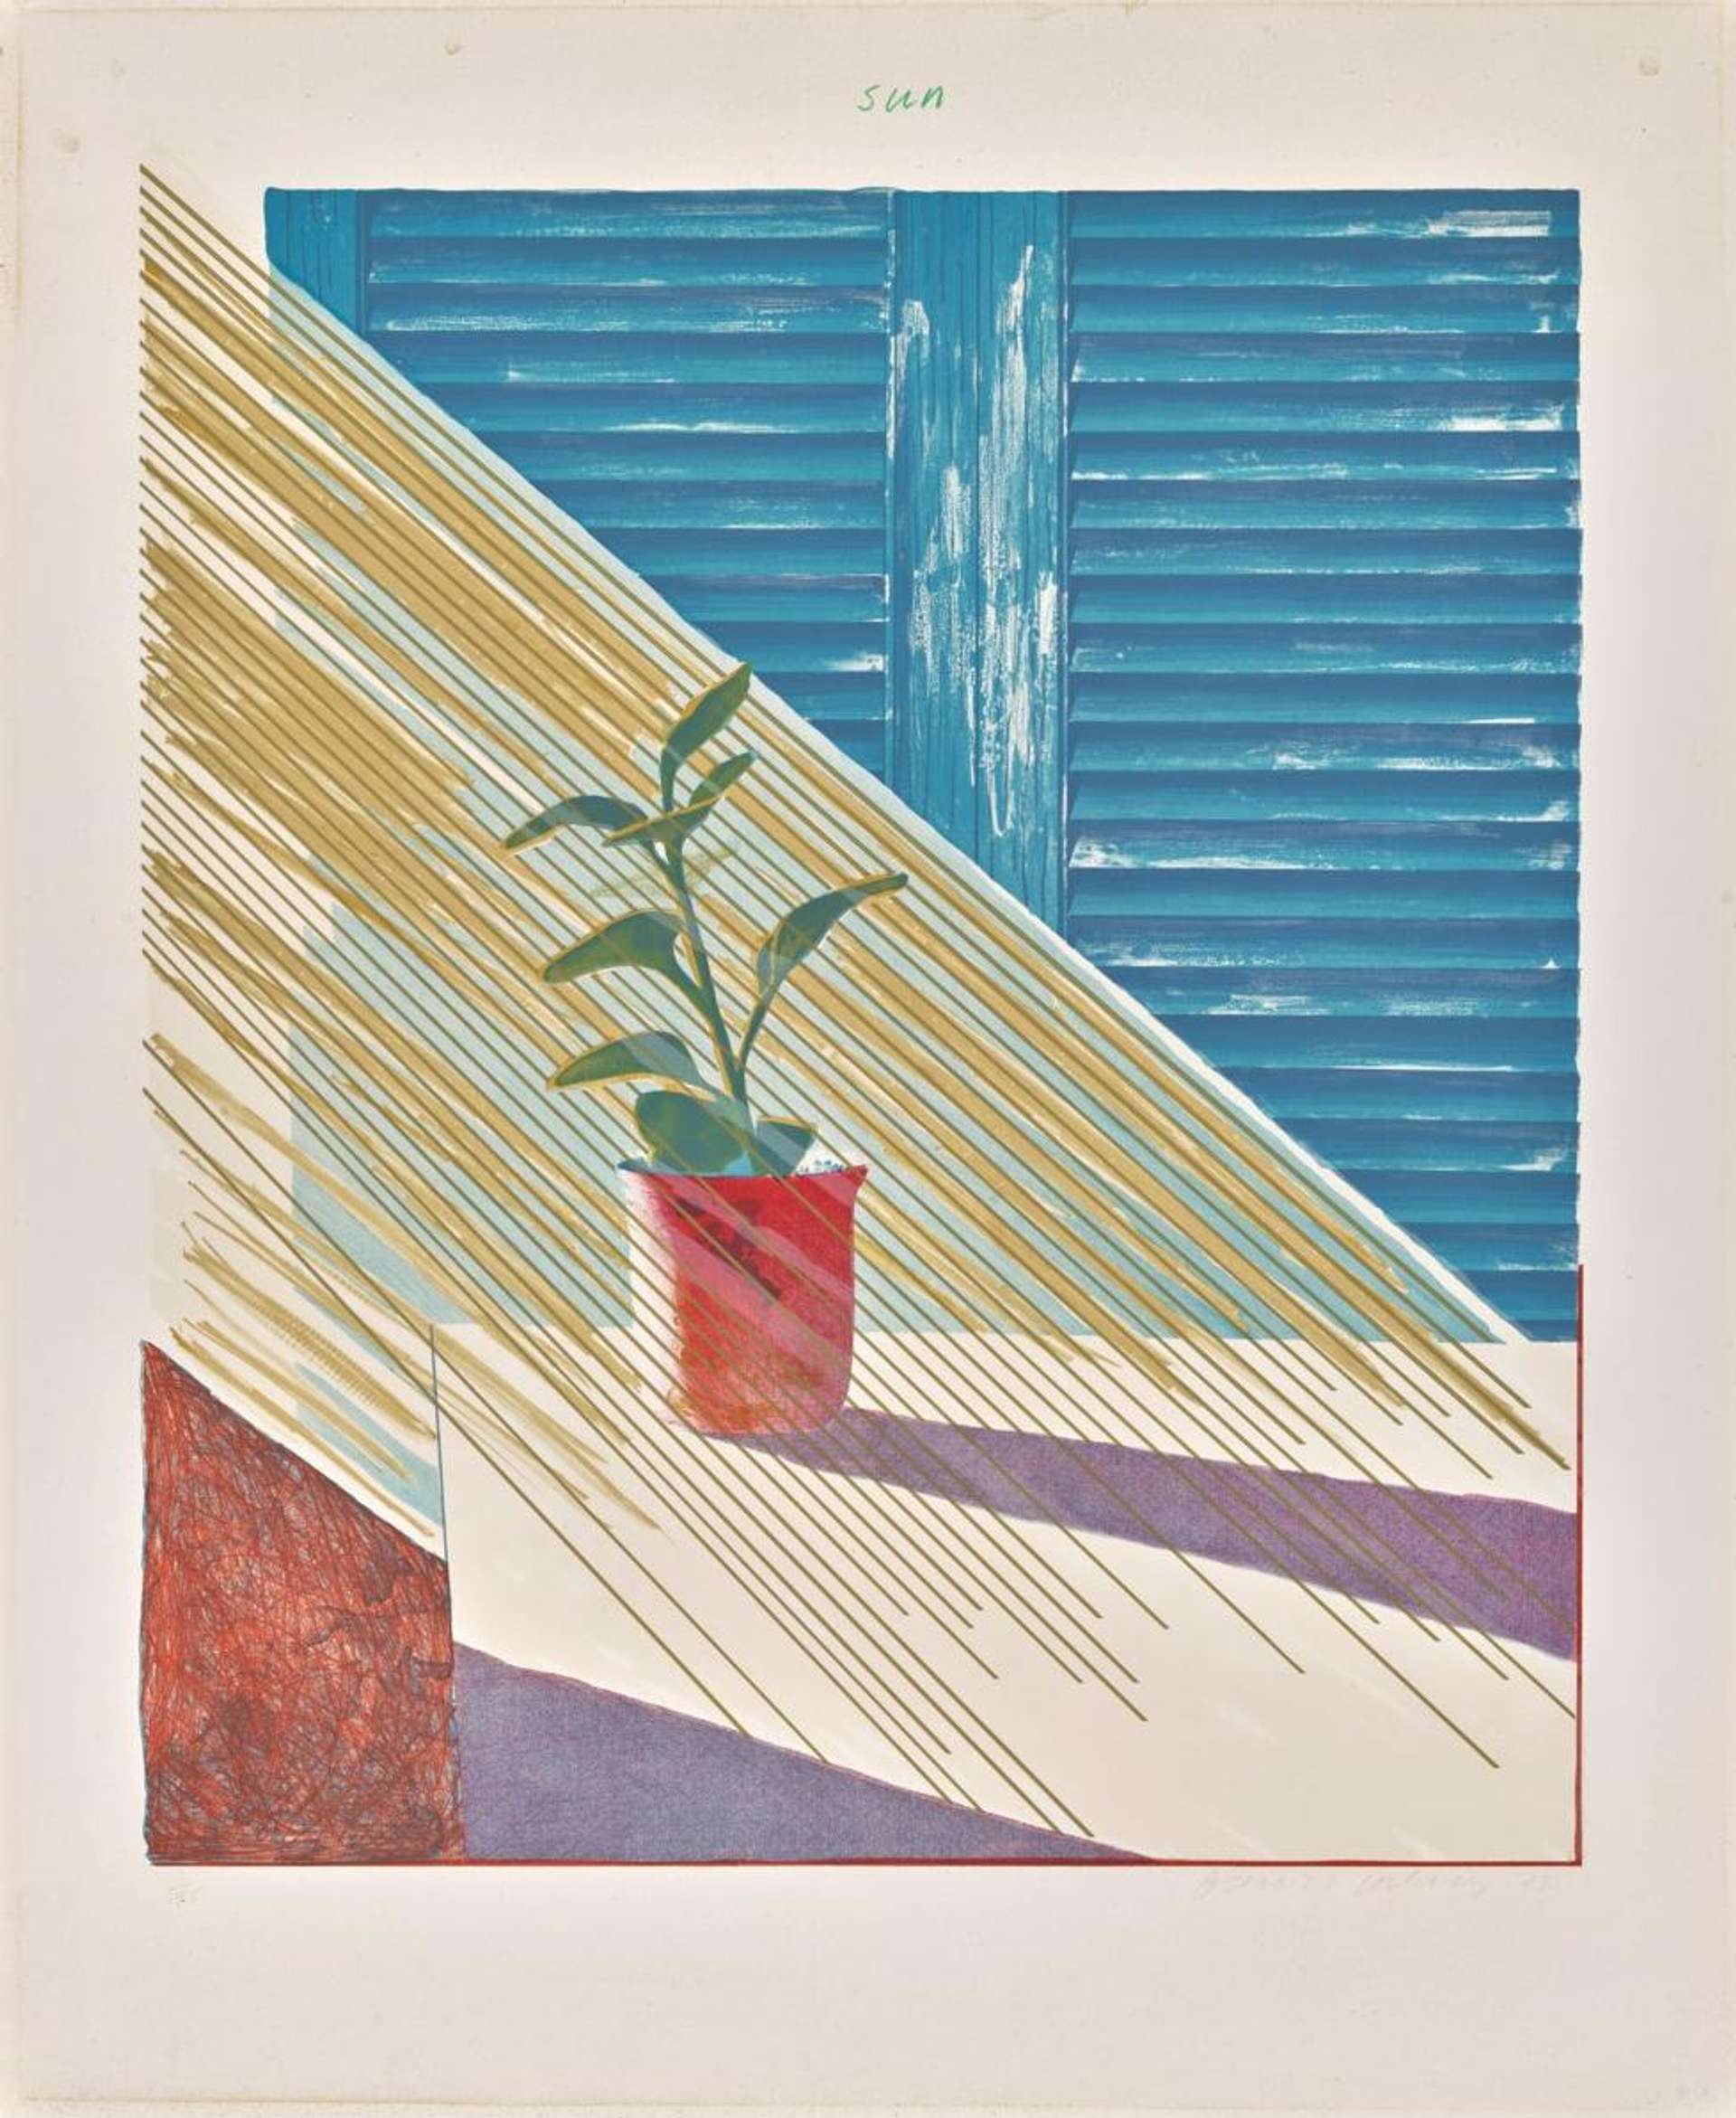 David Hockney's Sun.  A woodblock print of a small plant on the edge of a table with sun light covering it from the left side.